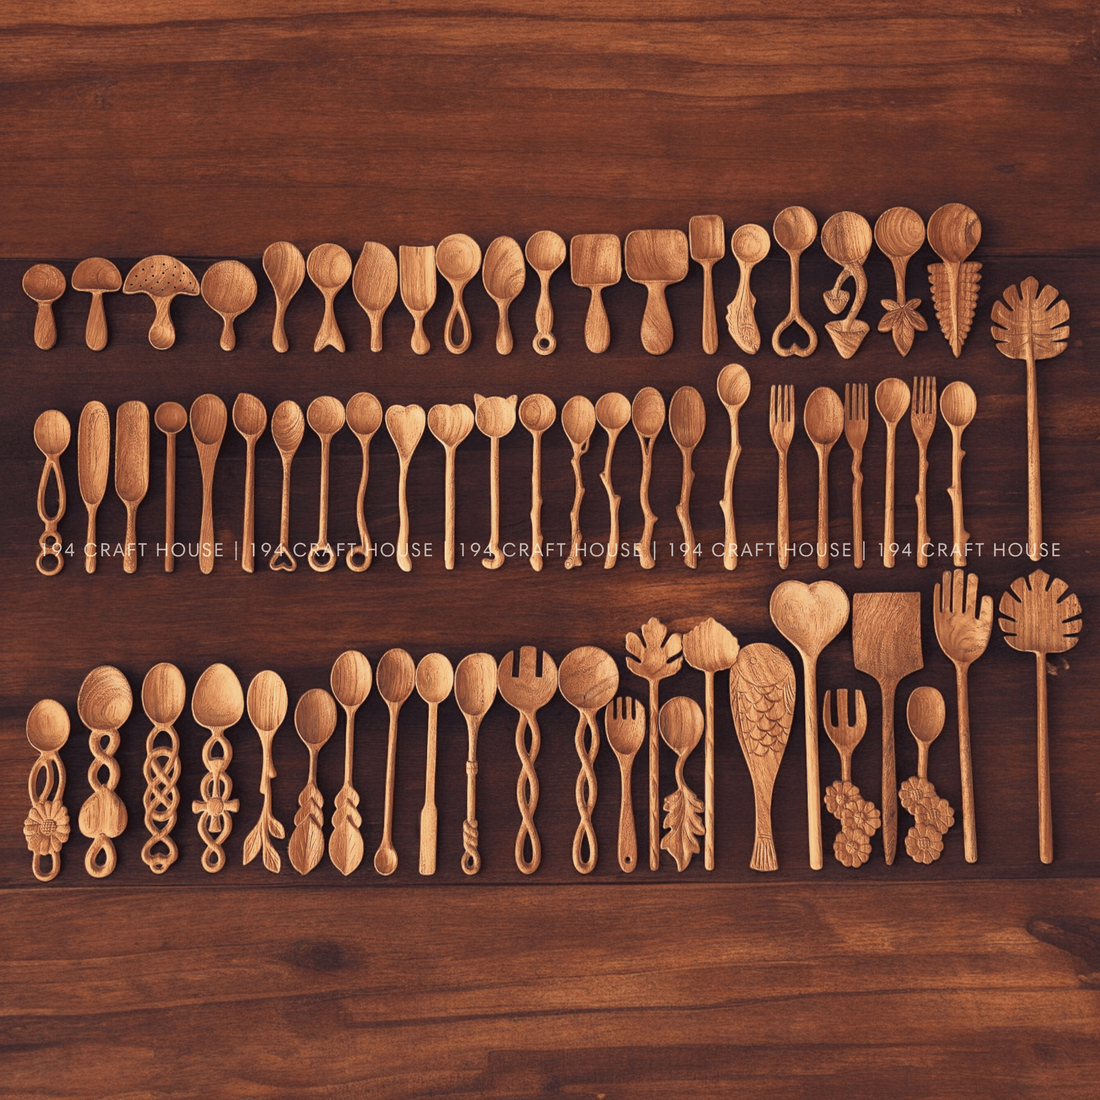 194+ Handcrafted Wooden Spoon and Fork Collection of 194 Craft House